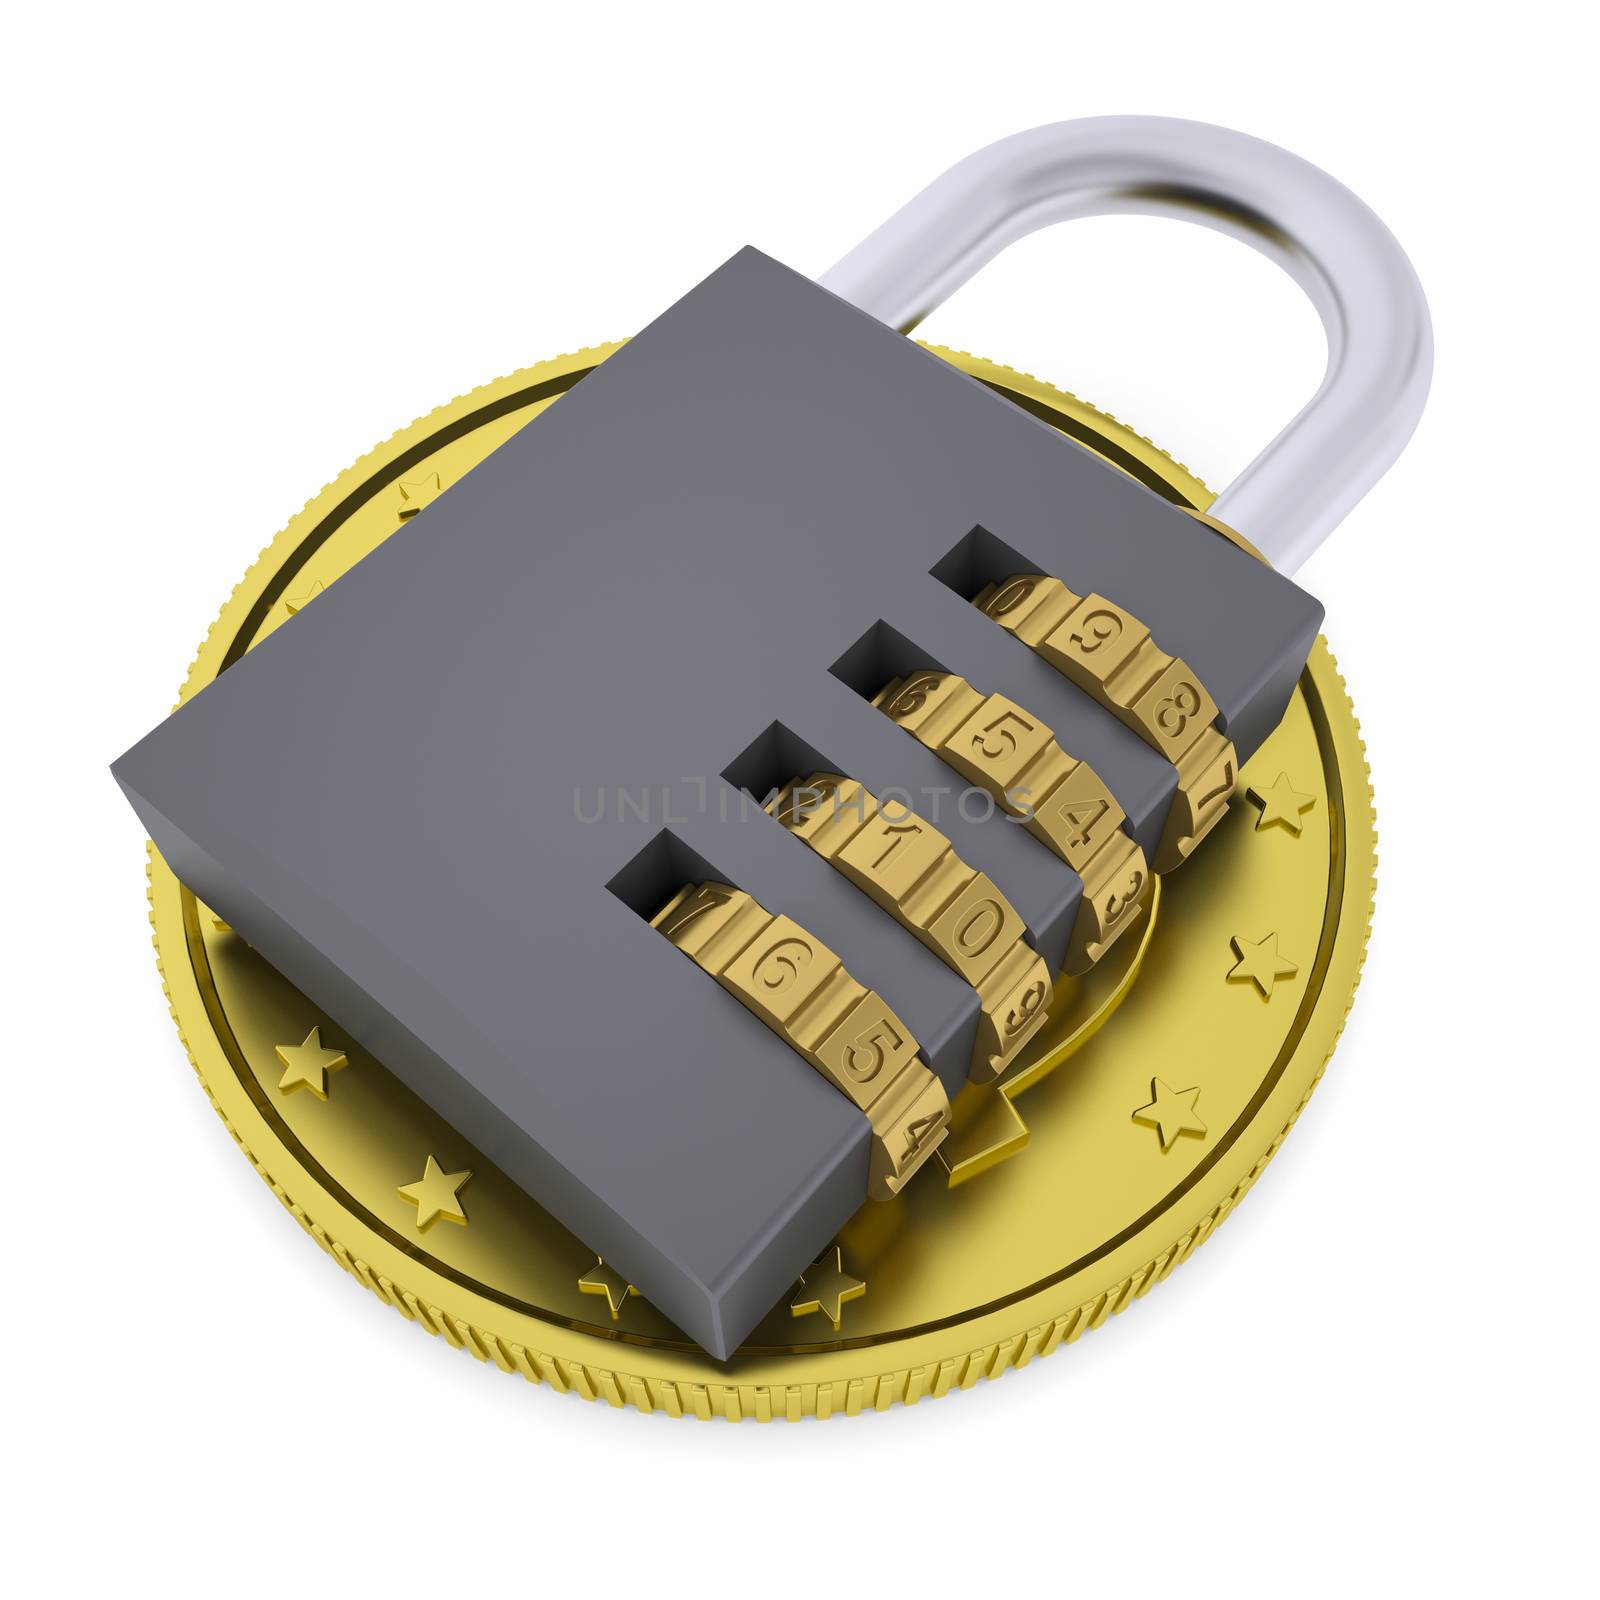 Golden Dollar and combination lock by cherezoff